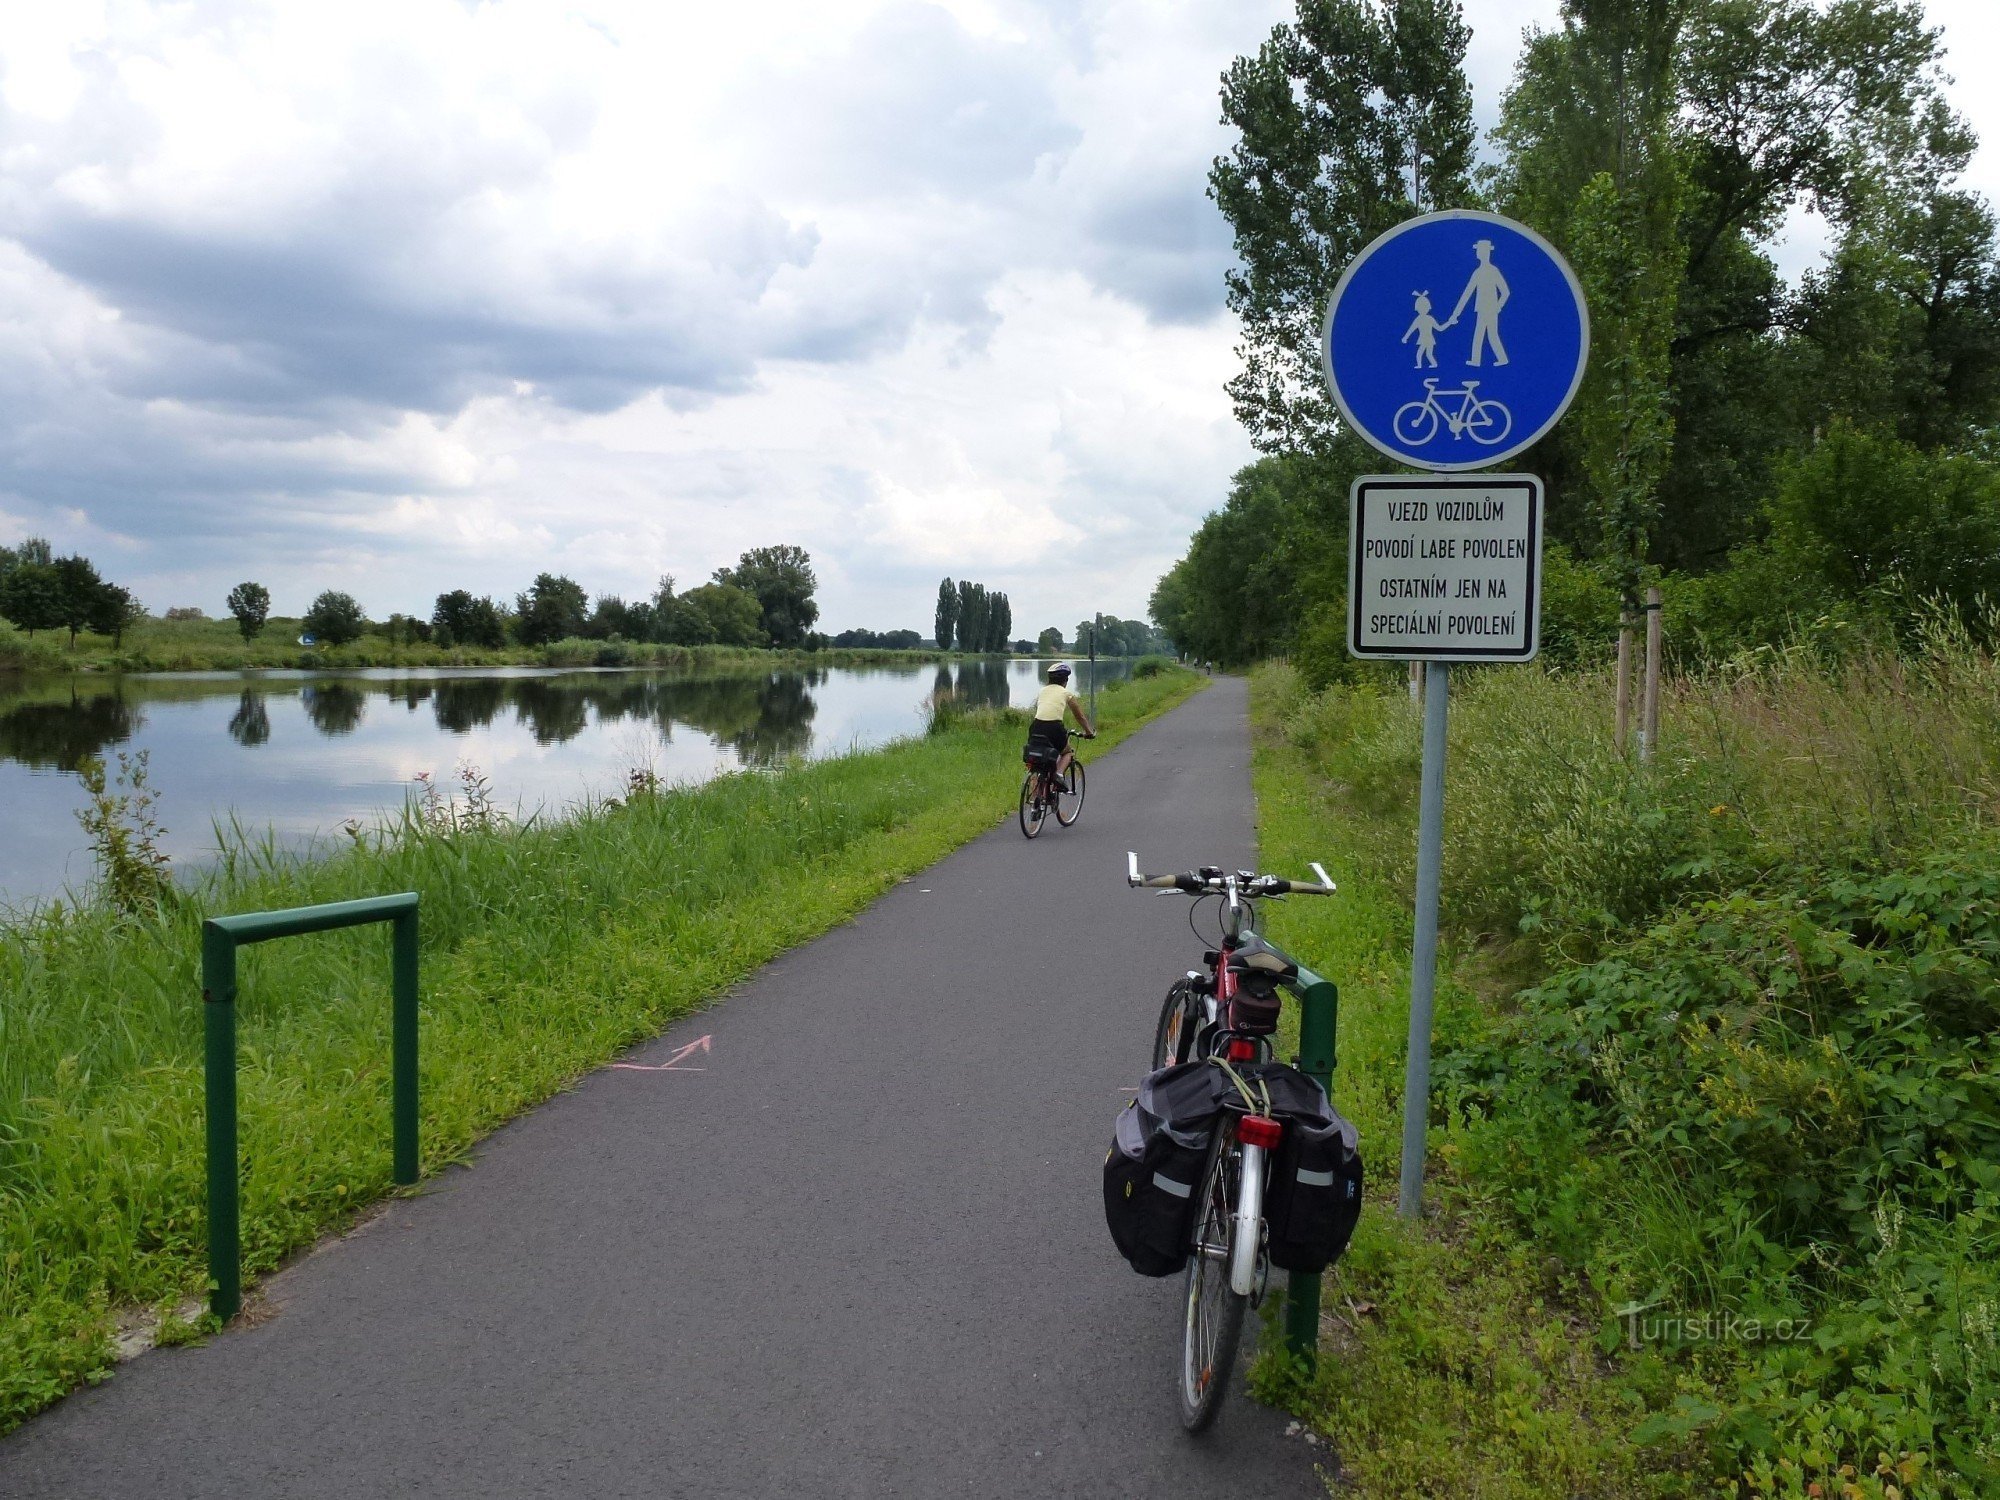 Cycle route 0019 near the Elbe